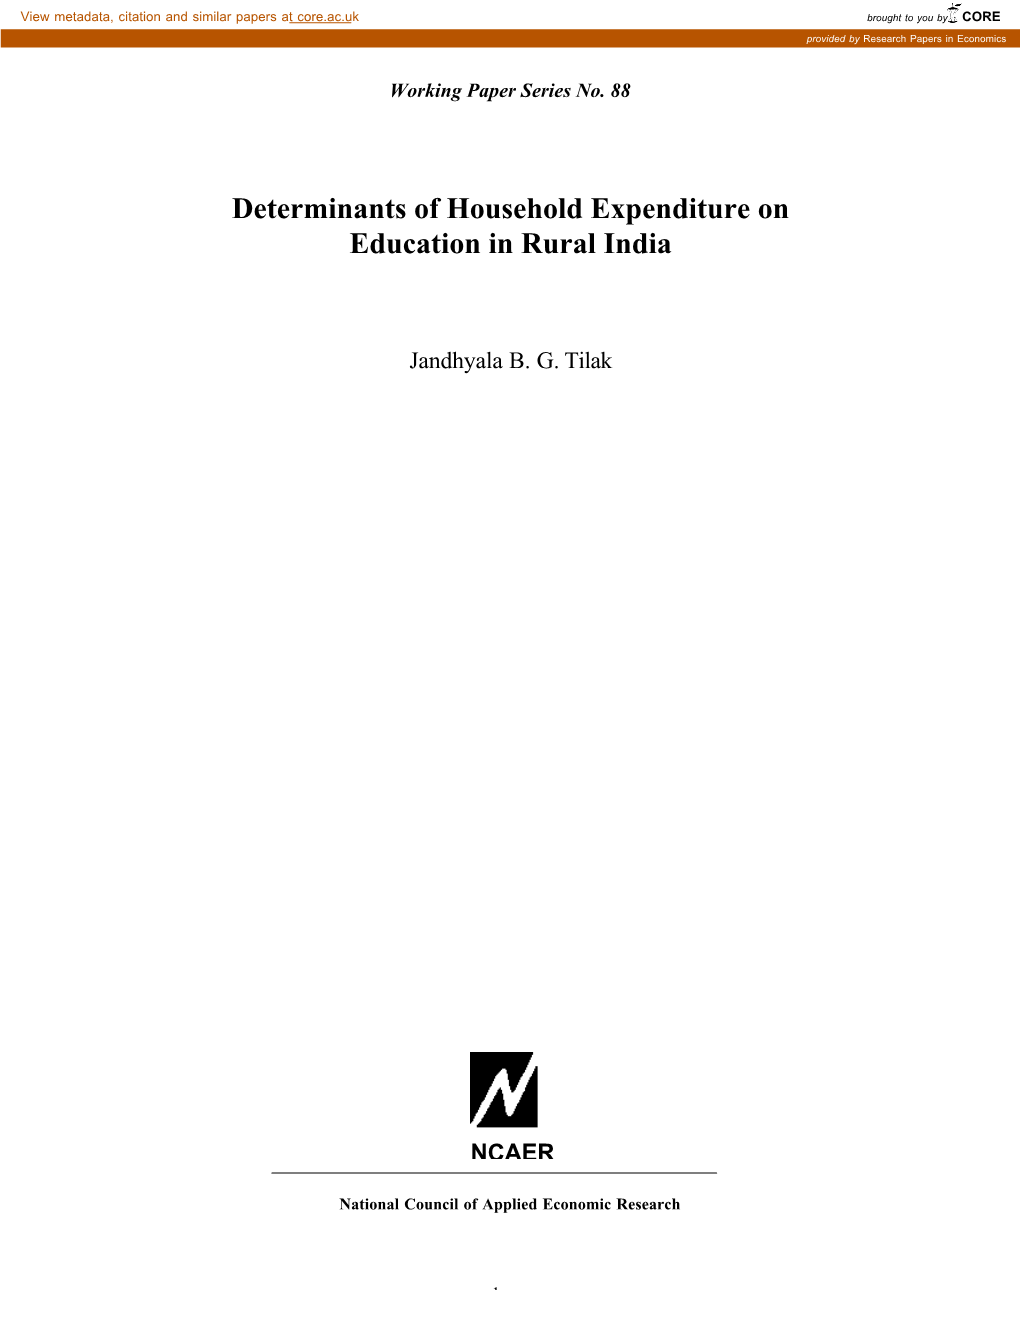 Determinants of Household Expenditure on Education in Rural India